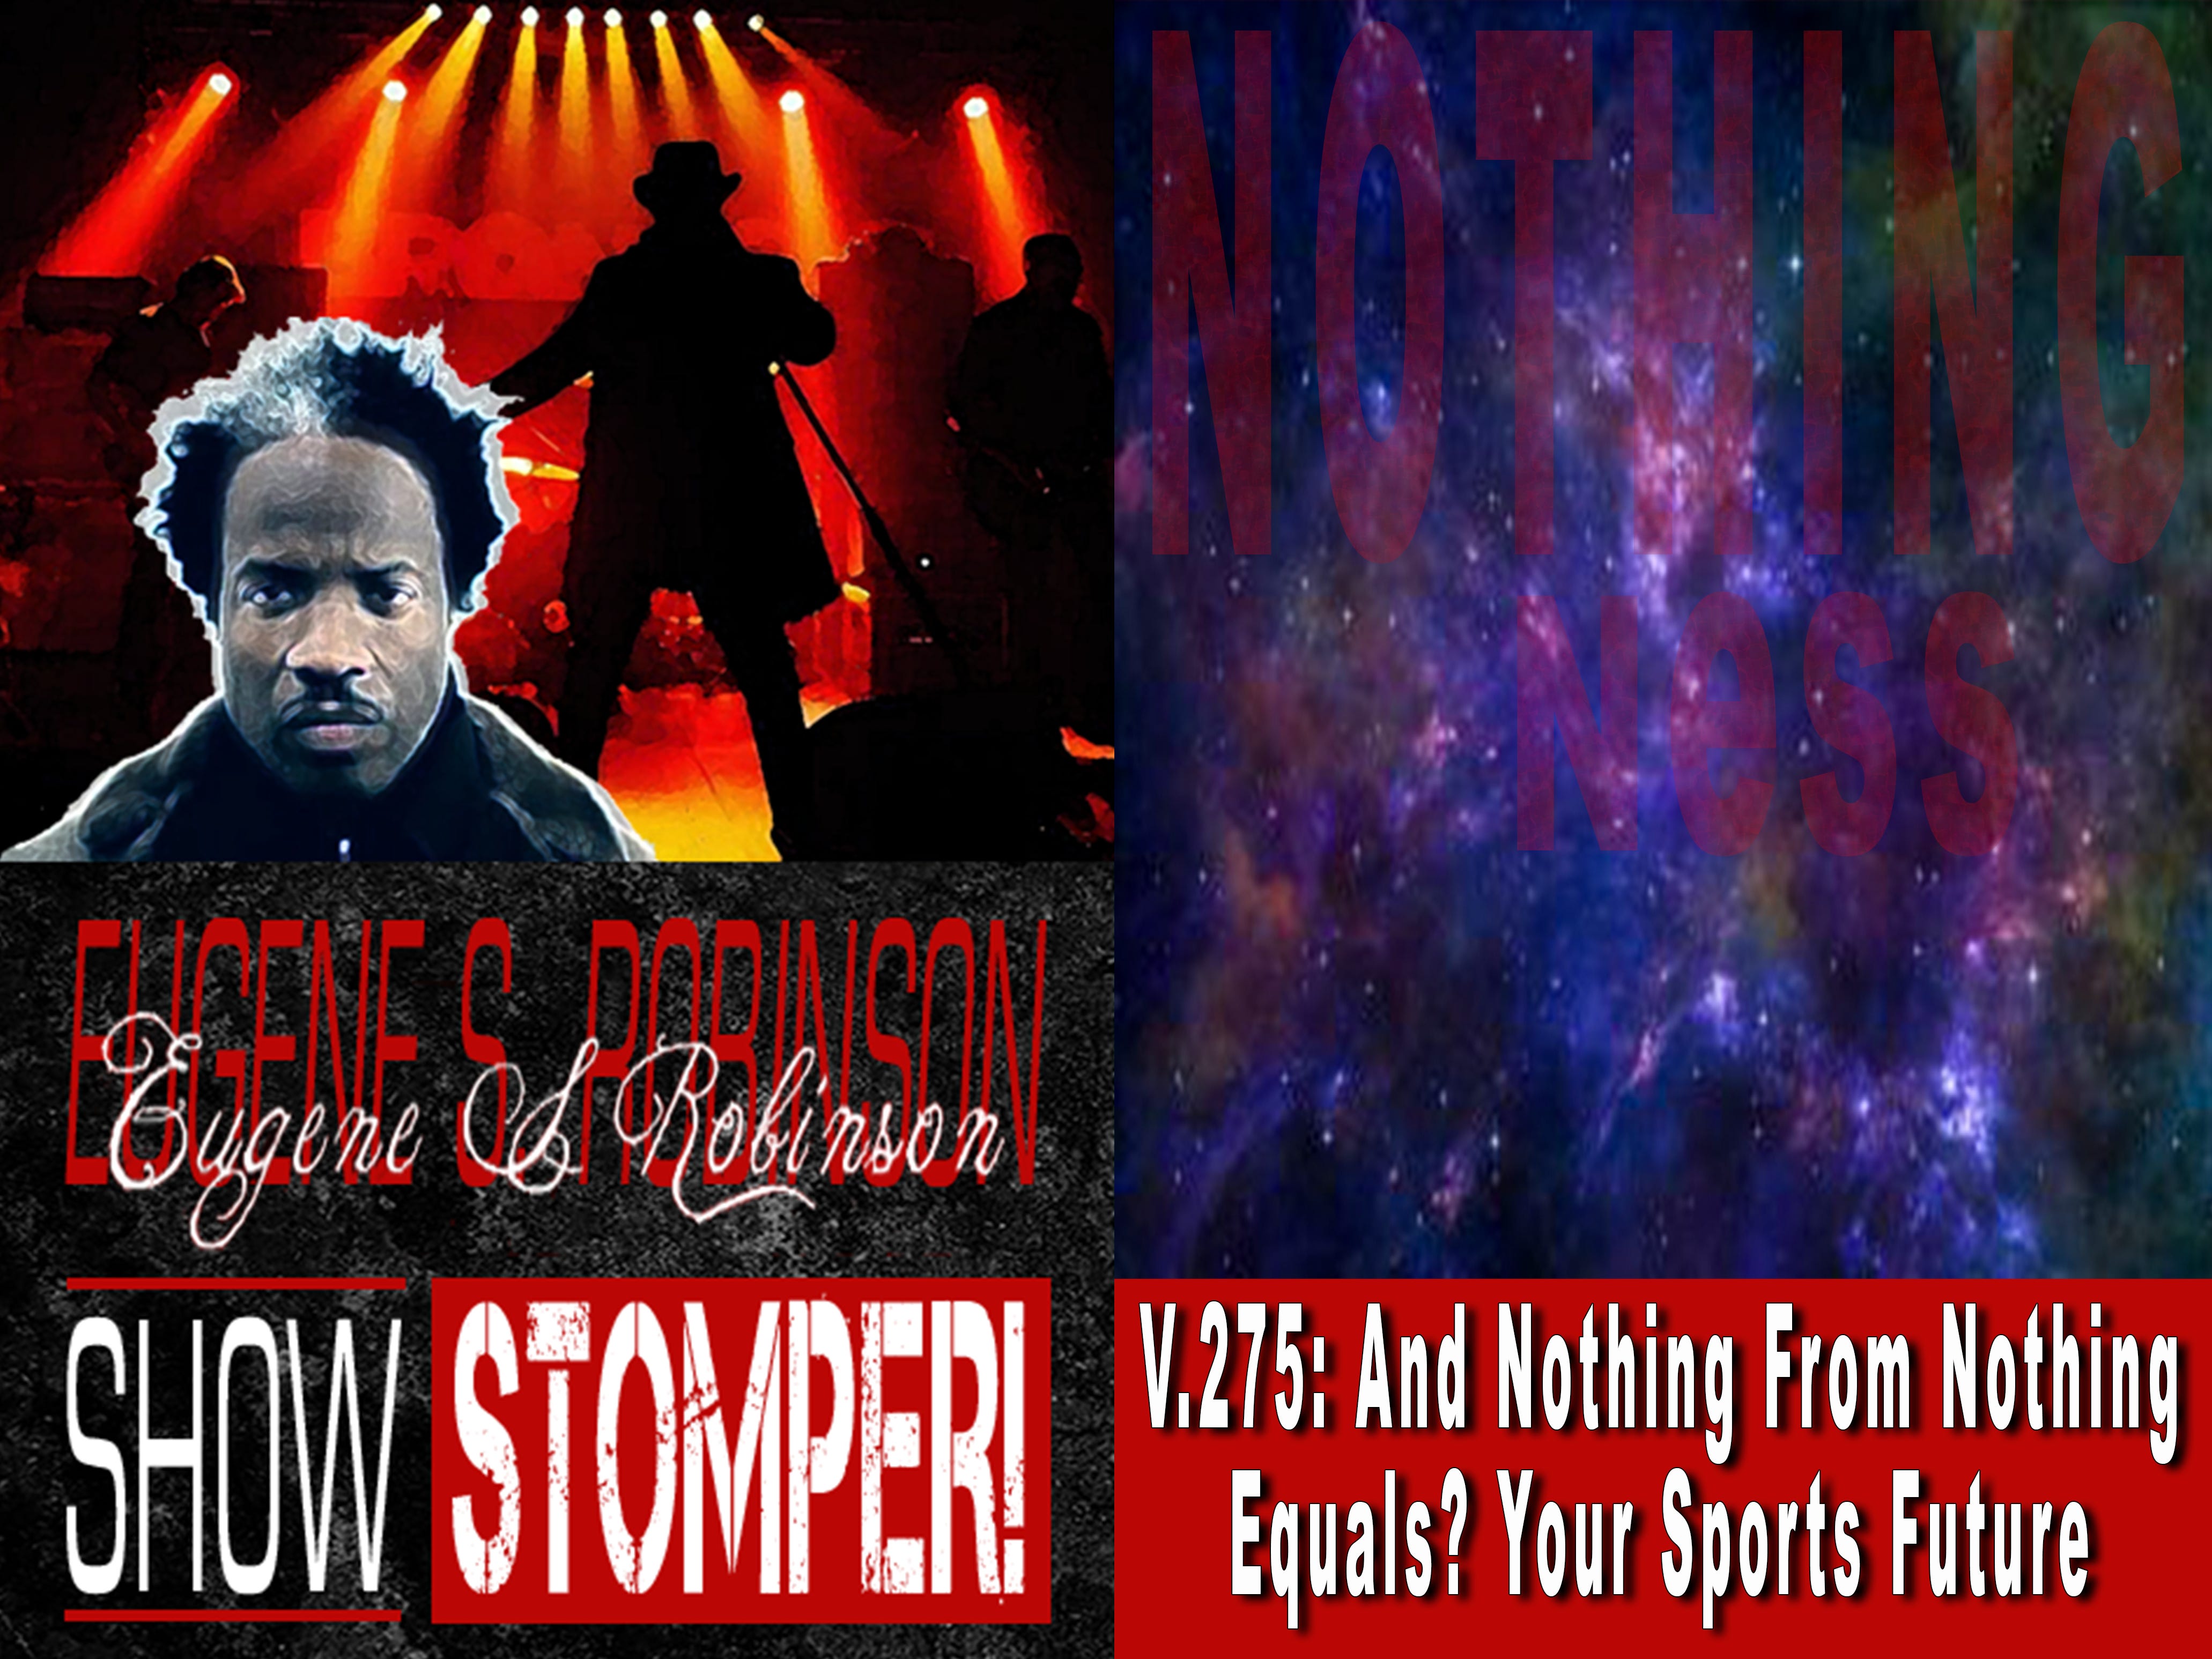 V.275: And Nothing From Nothing Equals? Your Sports Future. On The Eugene S. Robinson Show Stomper!